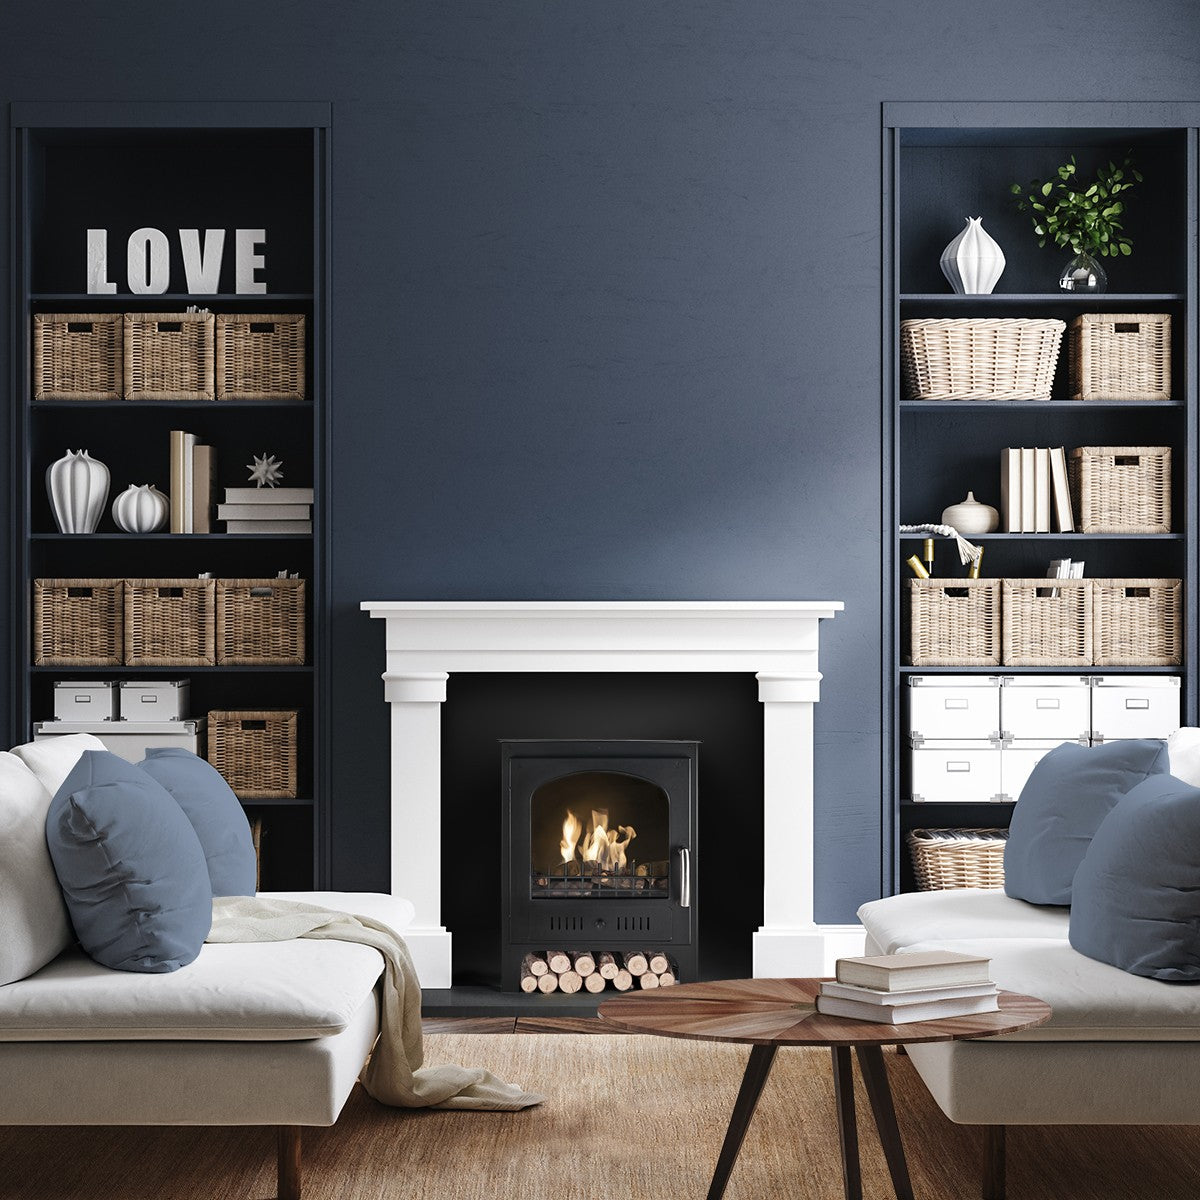 SLIMLINE Black Bioethanol Stove inside pre-existing fireplace with white mantelpiece in living room